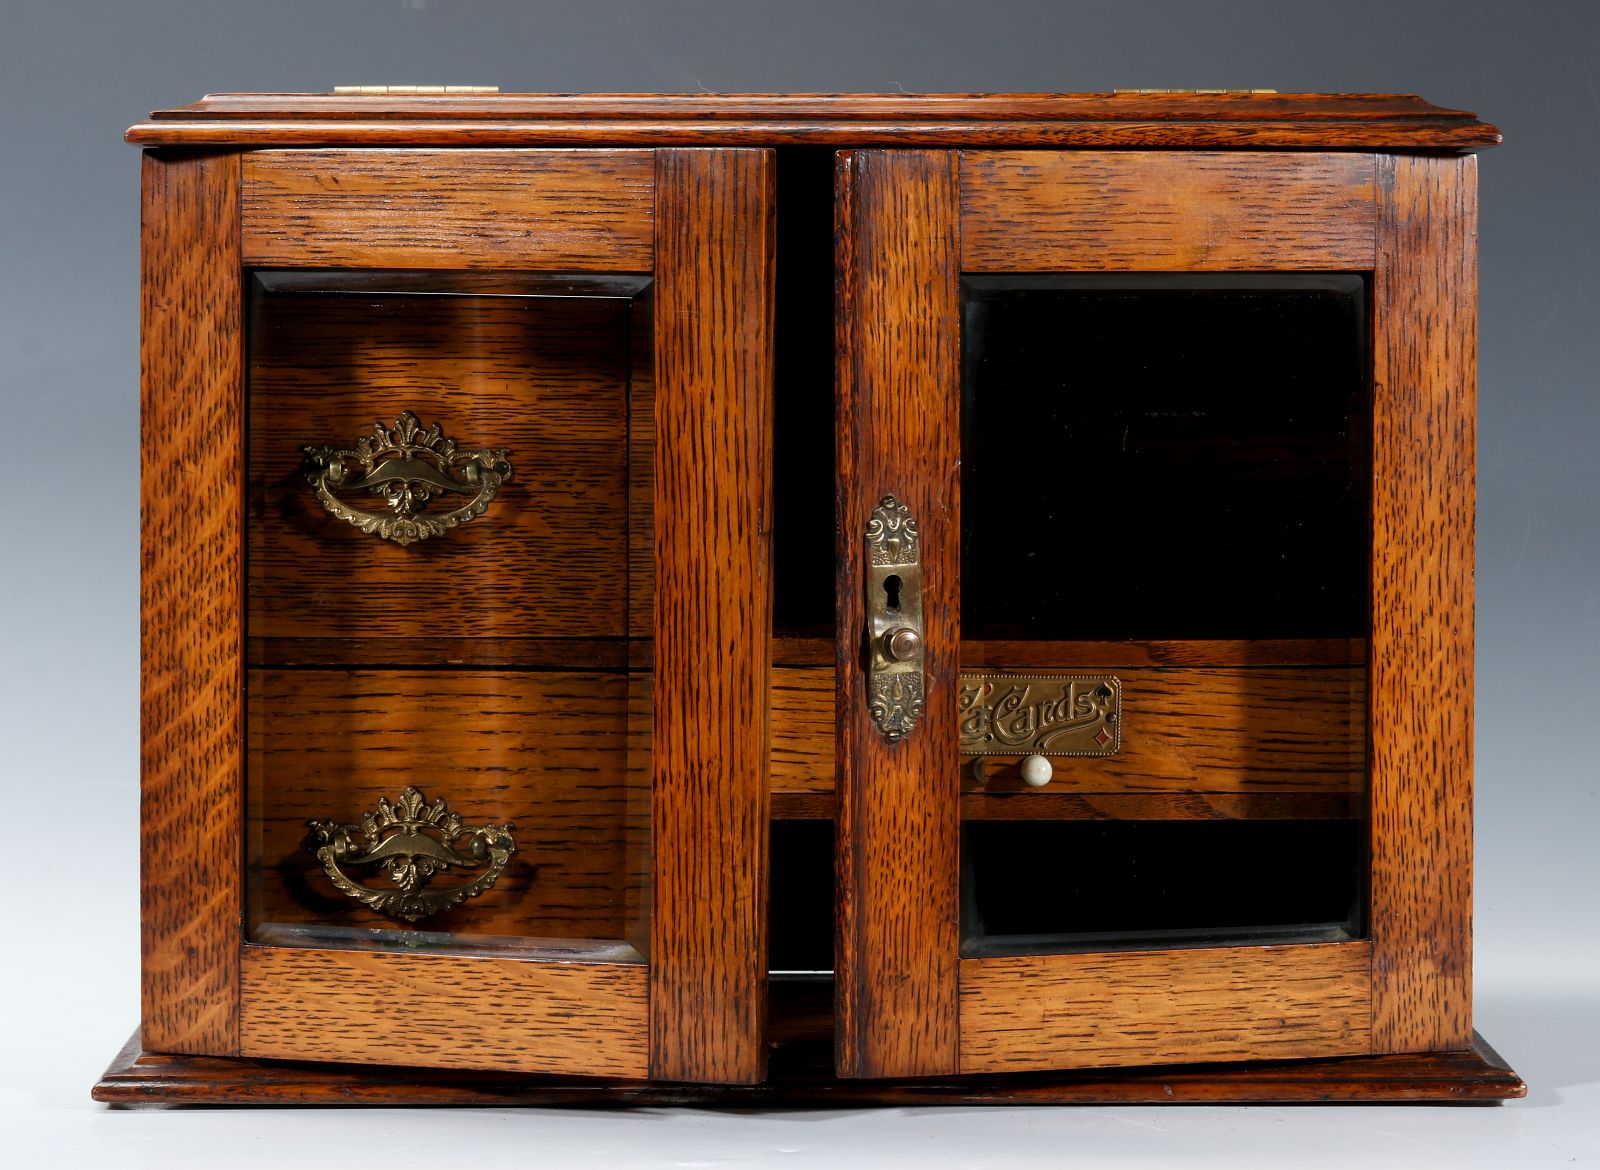 A CIRCA 1920s OAK PLAYING CARD AND GAMES CABINET